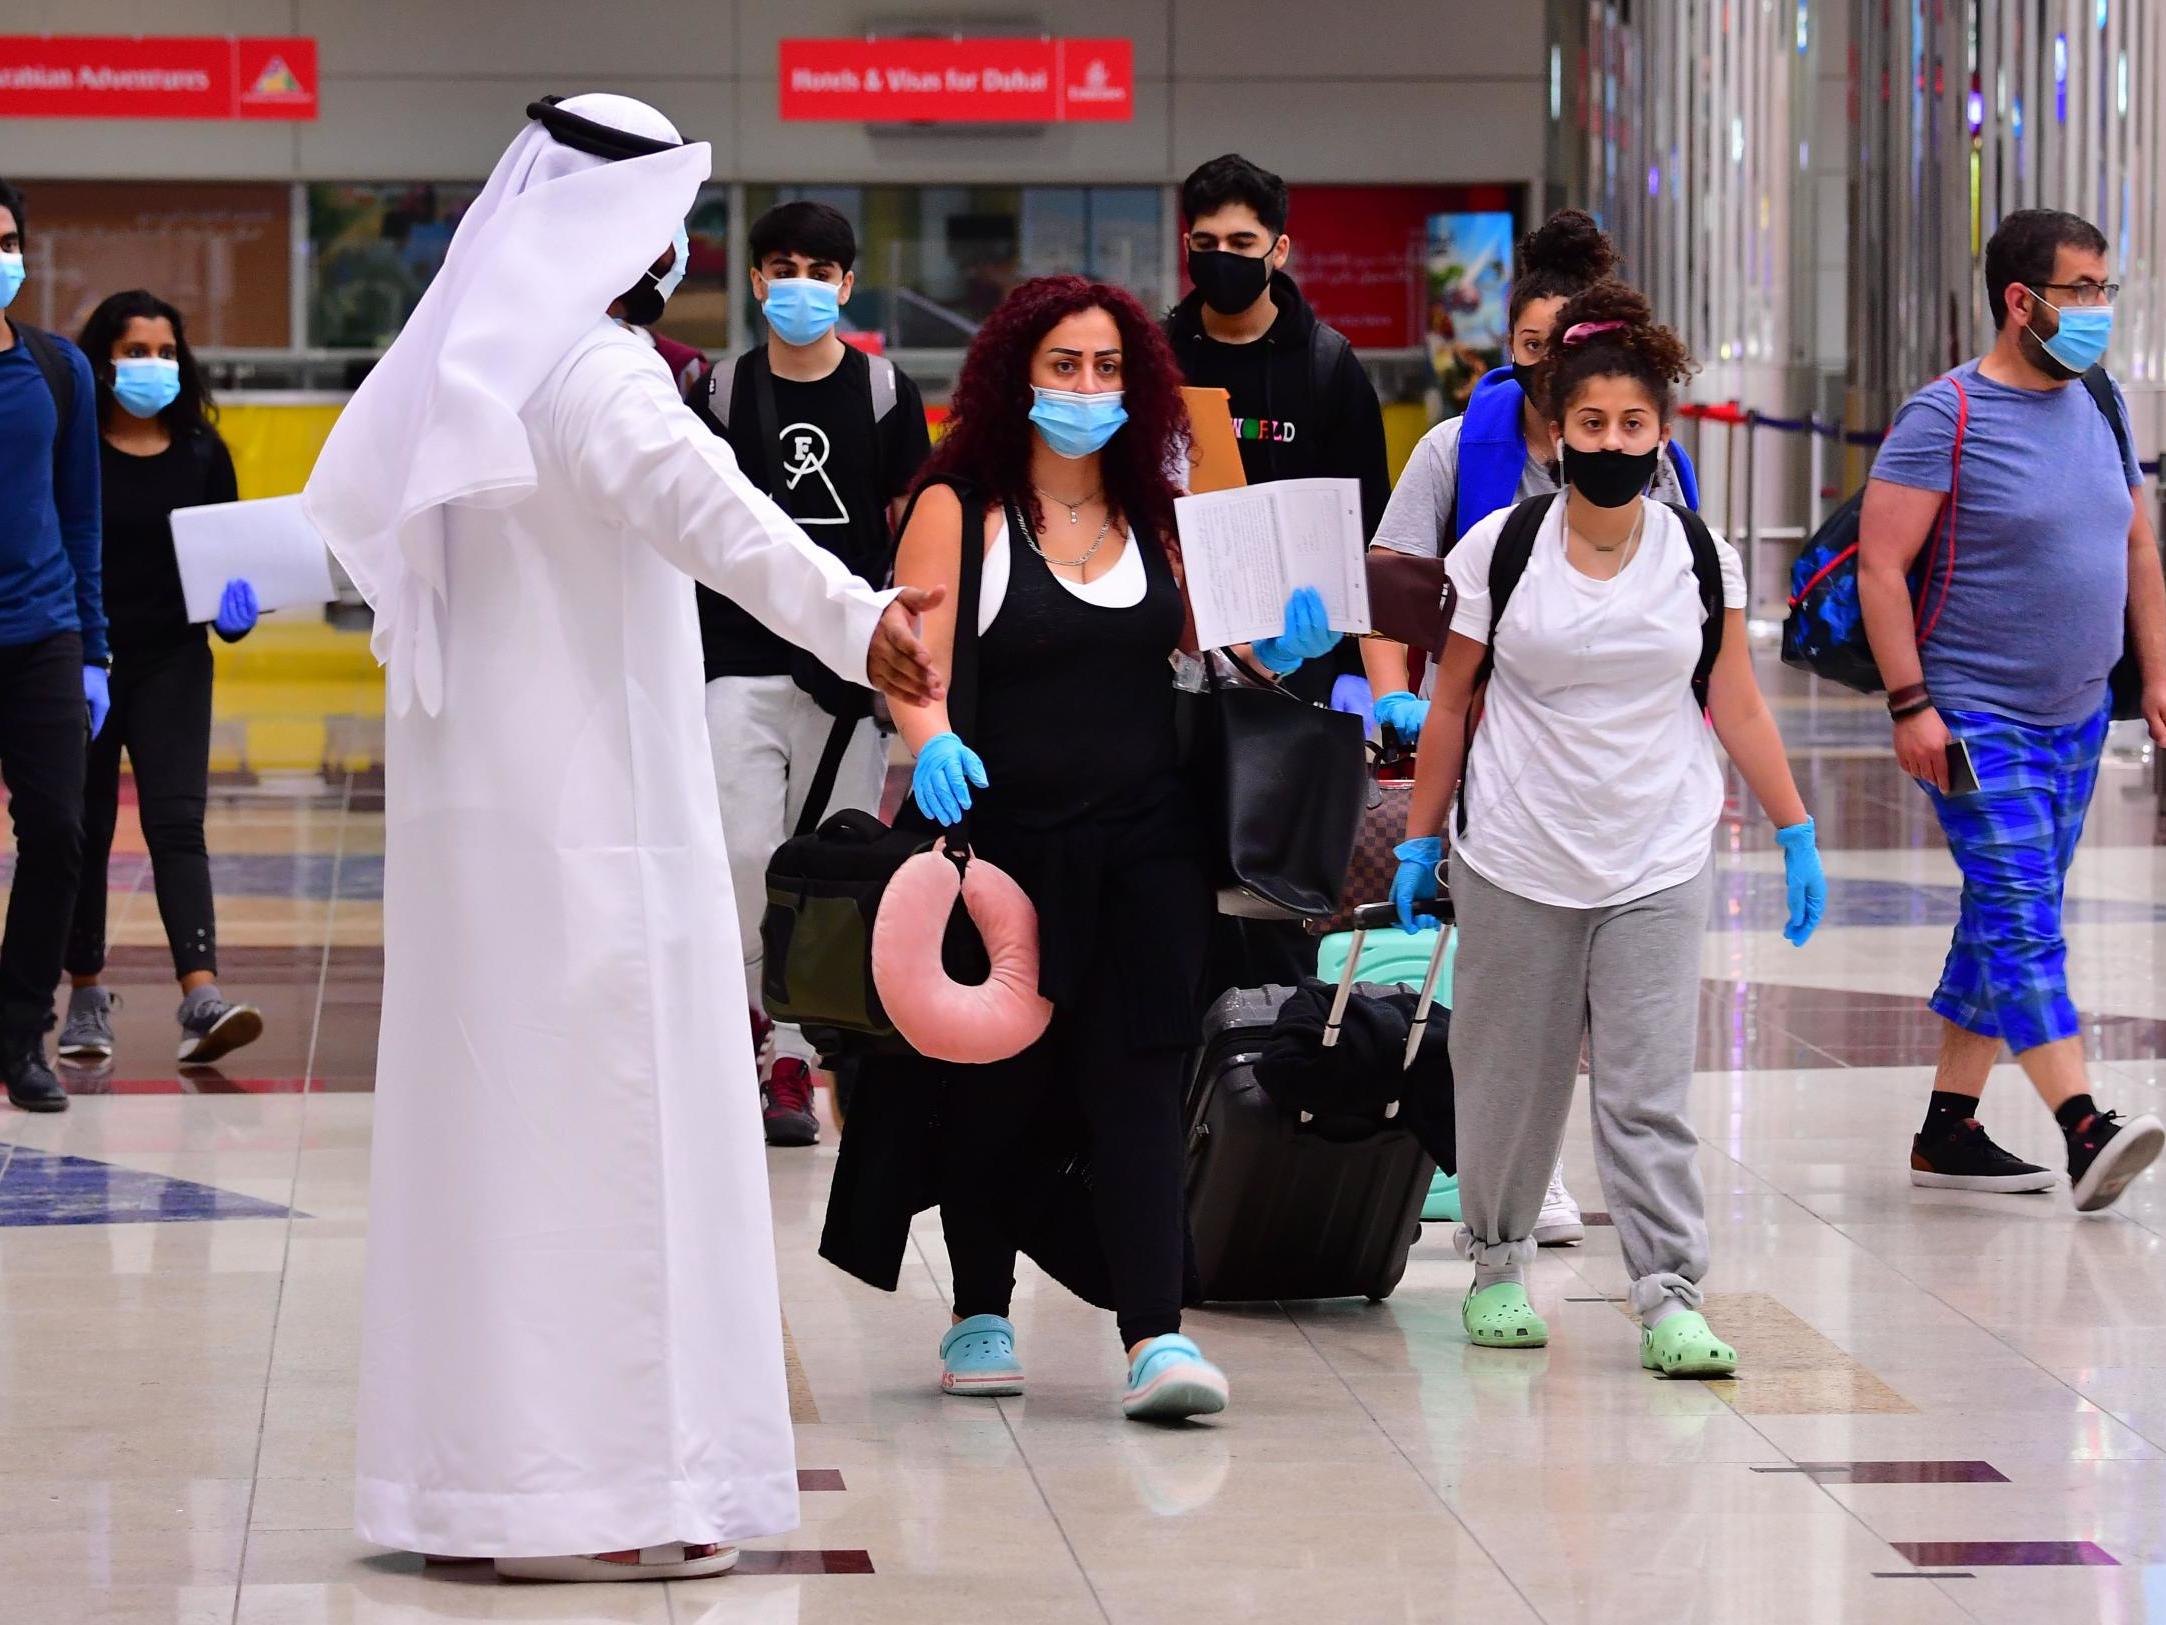 Tourists are seen arriving at Dubai airport on 8 July, the day the country reopened its doors to international visitors